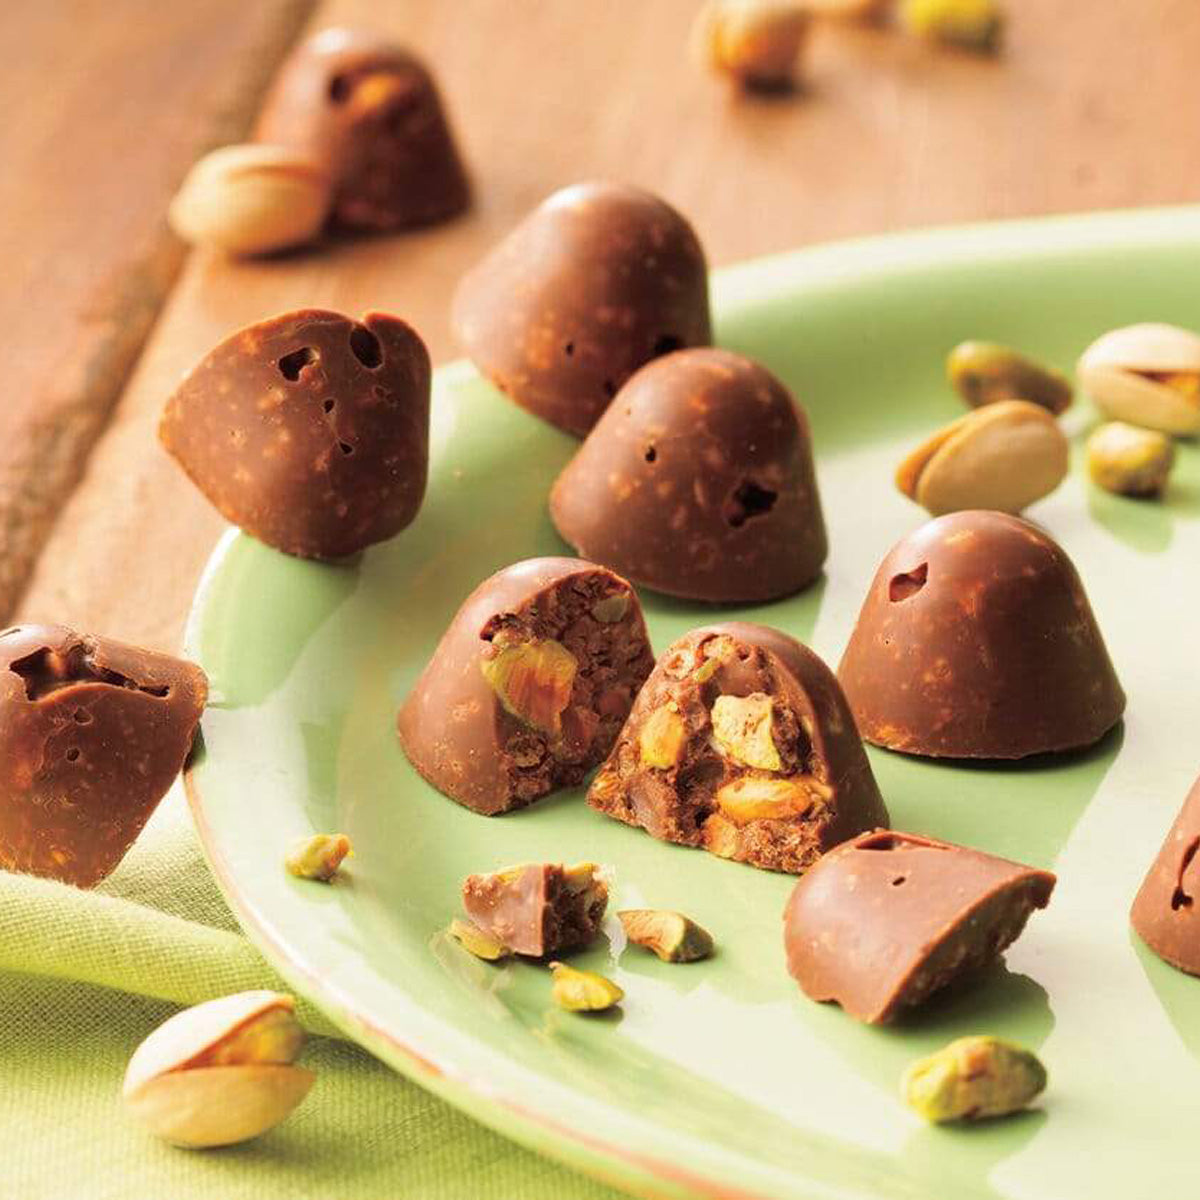 ROYCE' Chocolate - Pistachio Crunch Chocolate - Image shows a green plate filled with brown chocolate creations with pistachios. Accents include loose pistachios and a green tablecloth on wooden table.